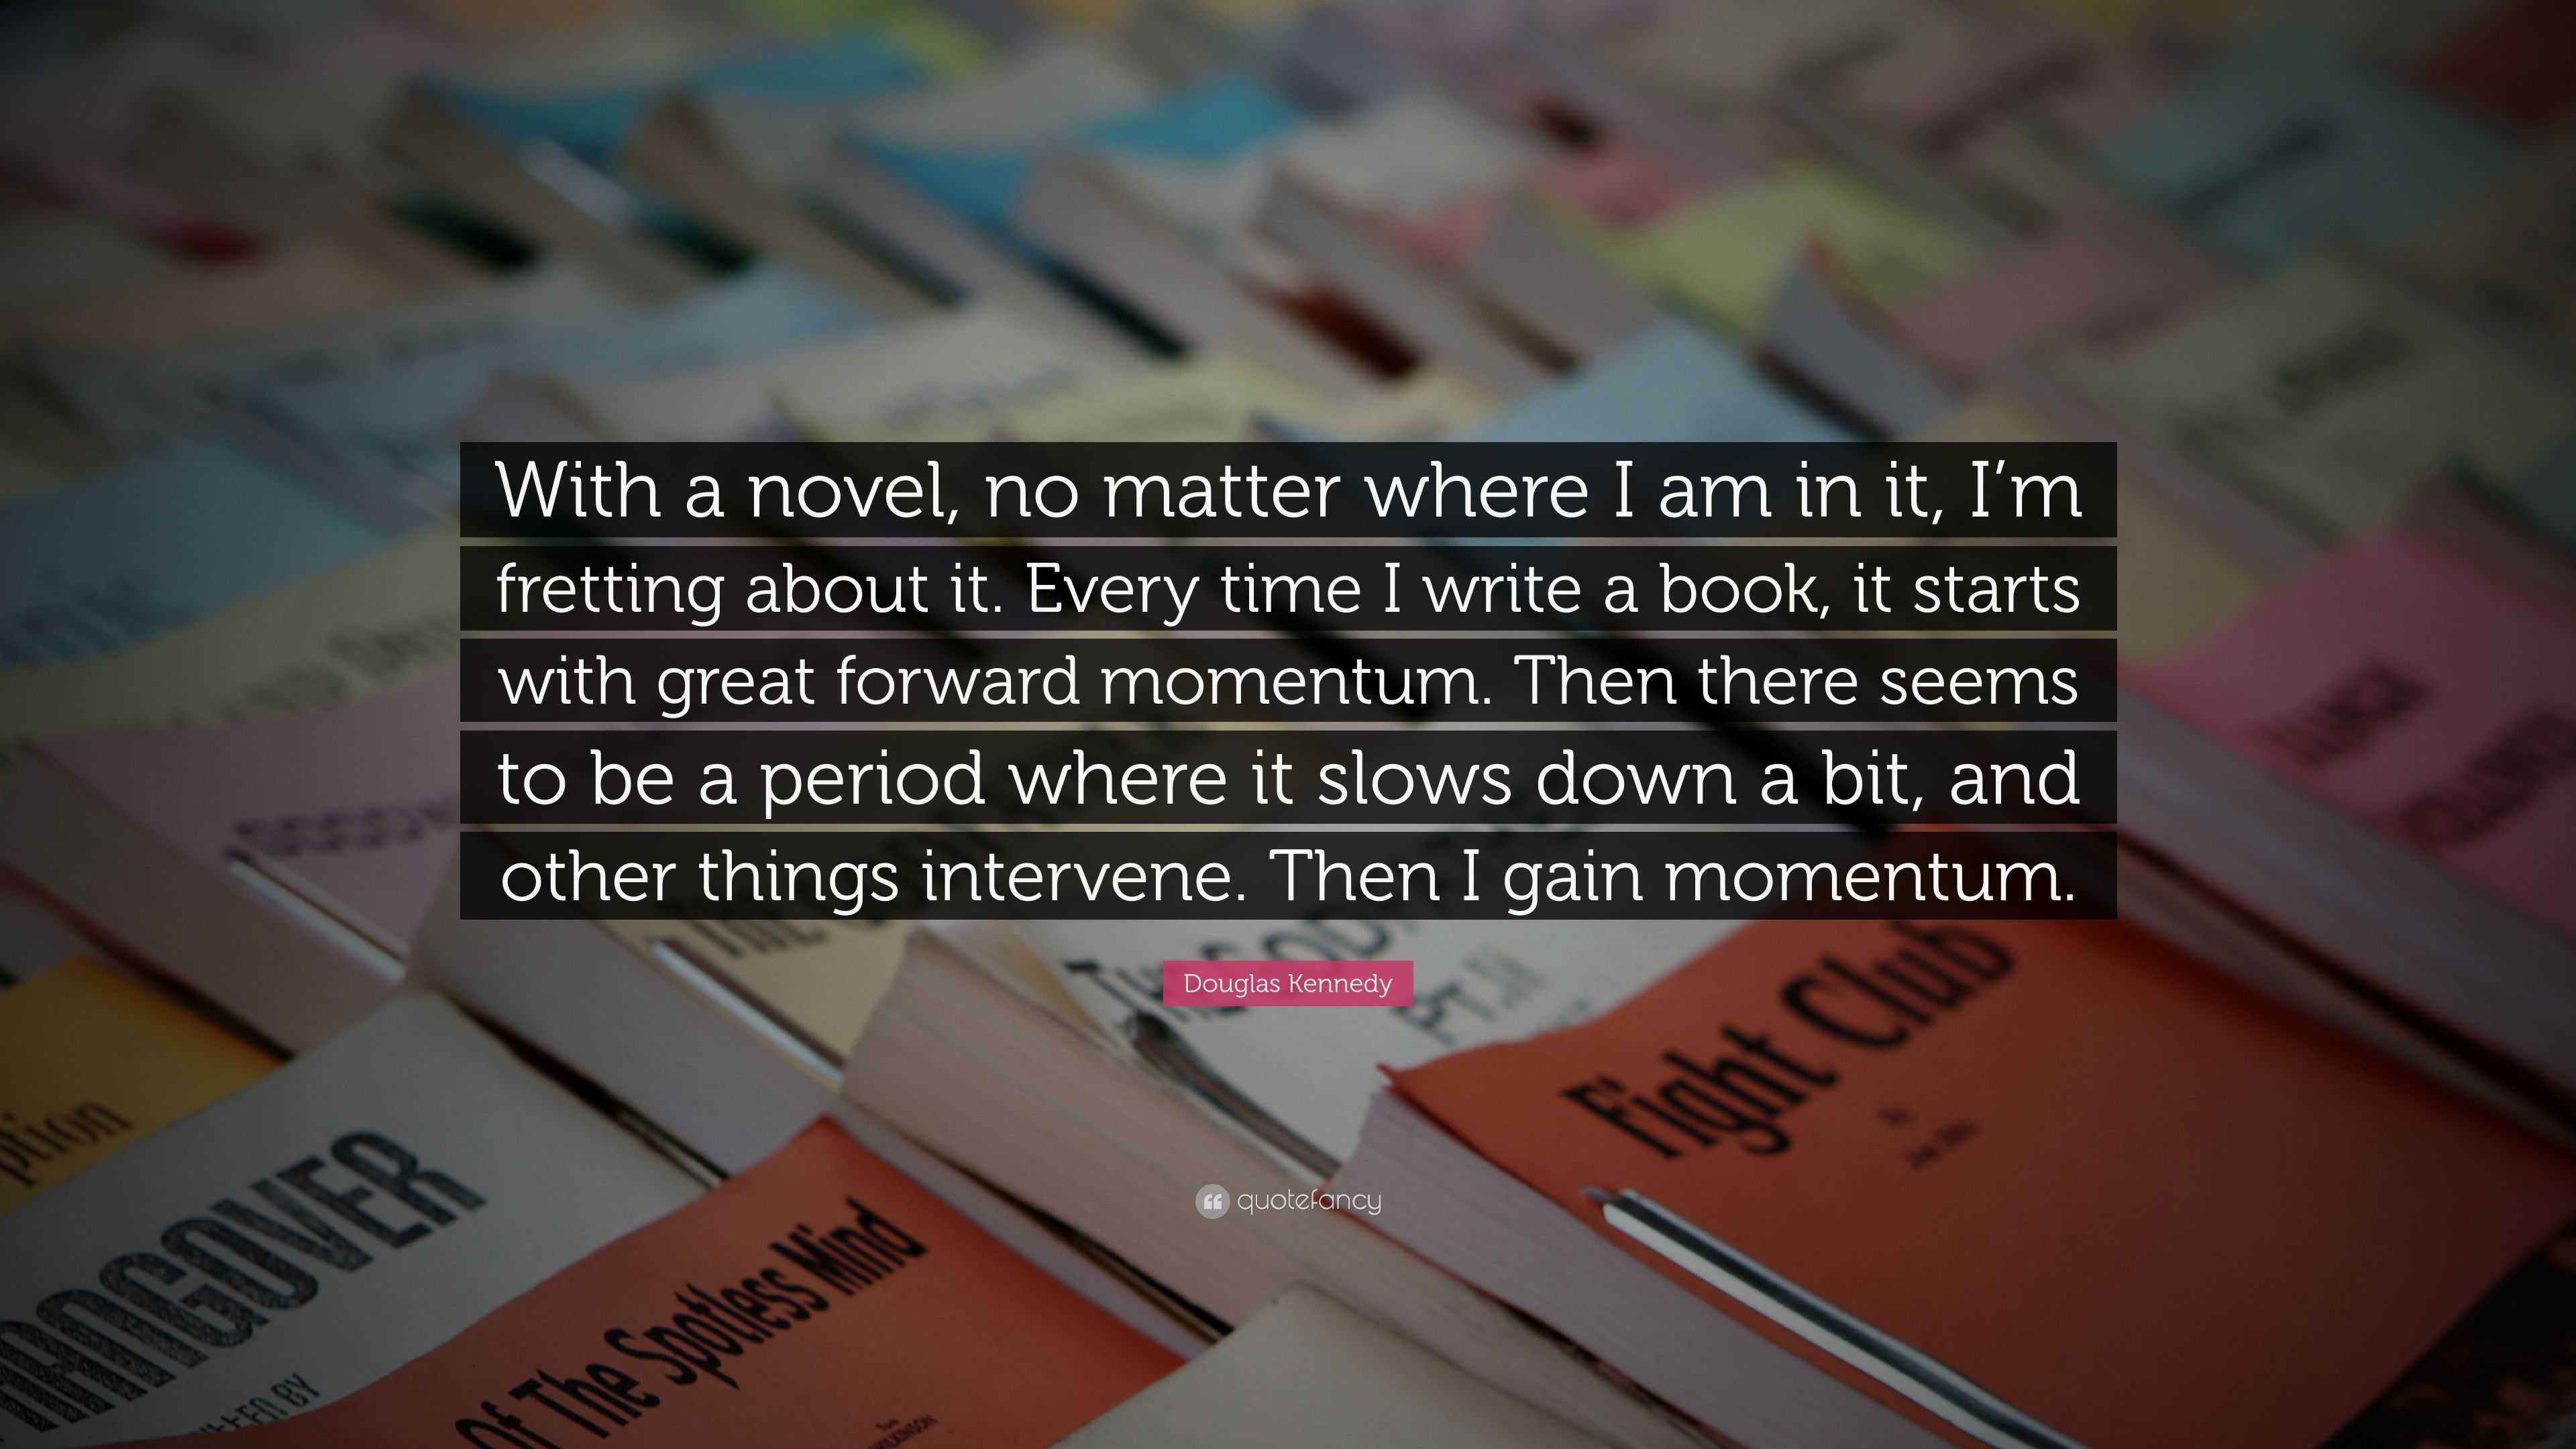 Douglas Kennedy Quote: “With a novel, no matter where I am in it